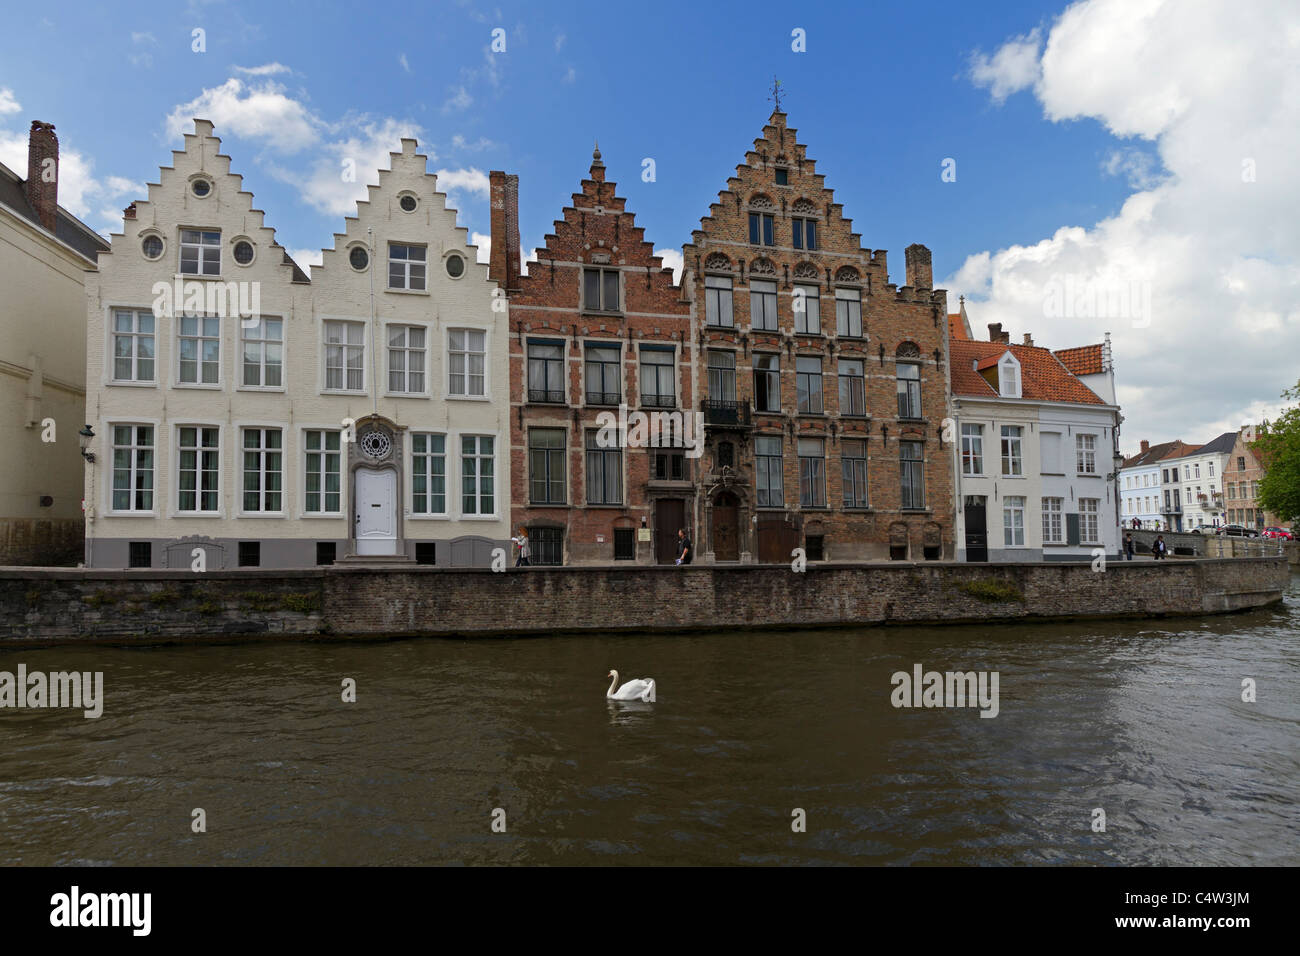 Spieglerei canal, Bruges, Belgium. A swan passes typical canalside houses with their stepped gables and medieval architecture. Stock Photo